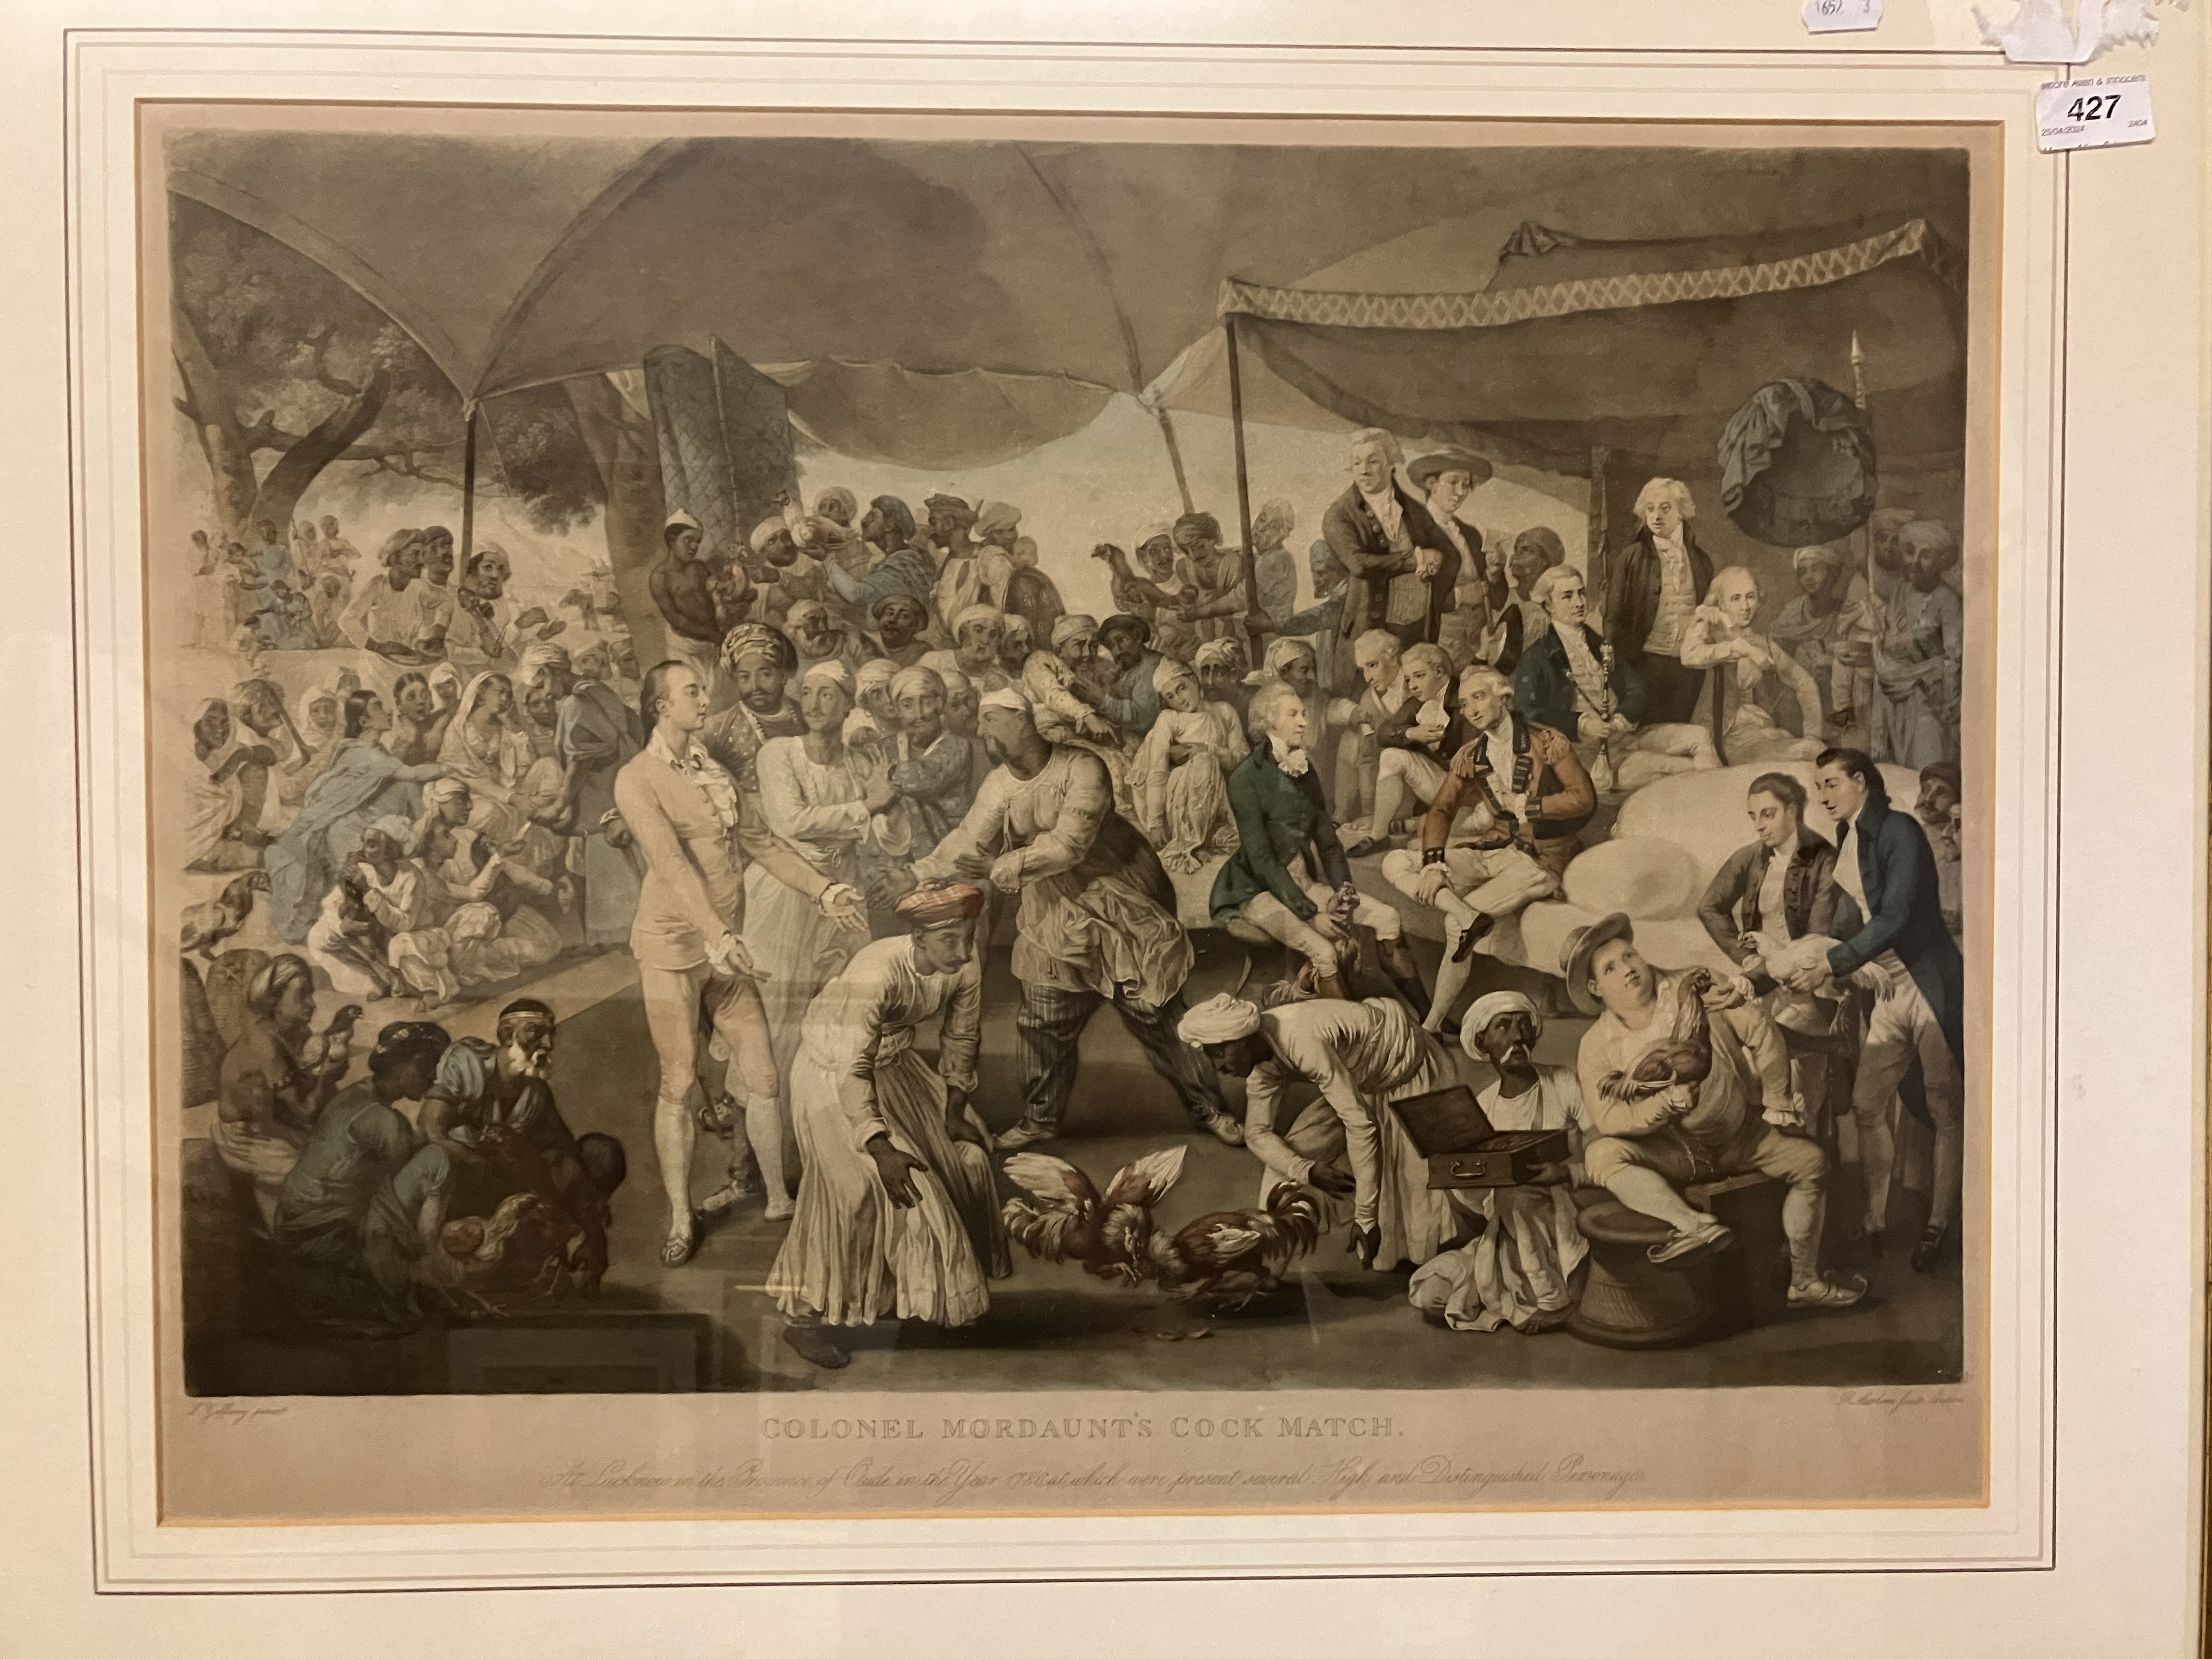 AFTER JOHANN ZOFFANY (1733-1810) "Colonel Mordaunt's Cock Match", - Image 10 of 26